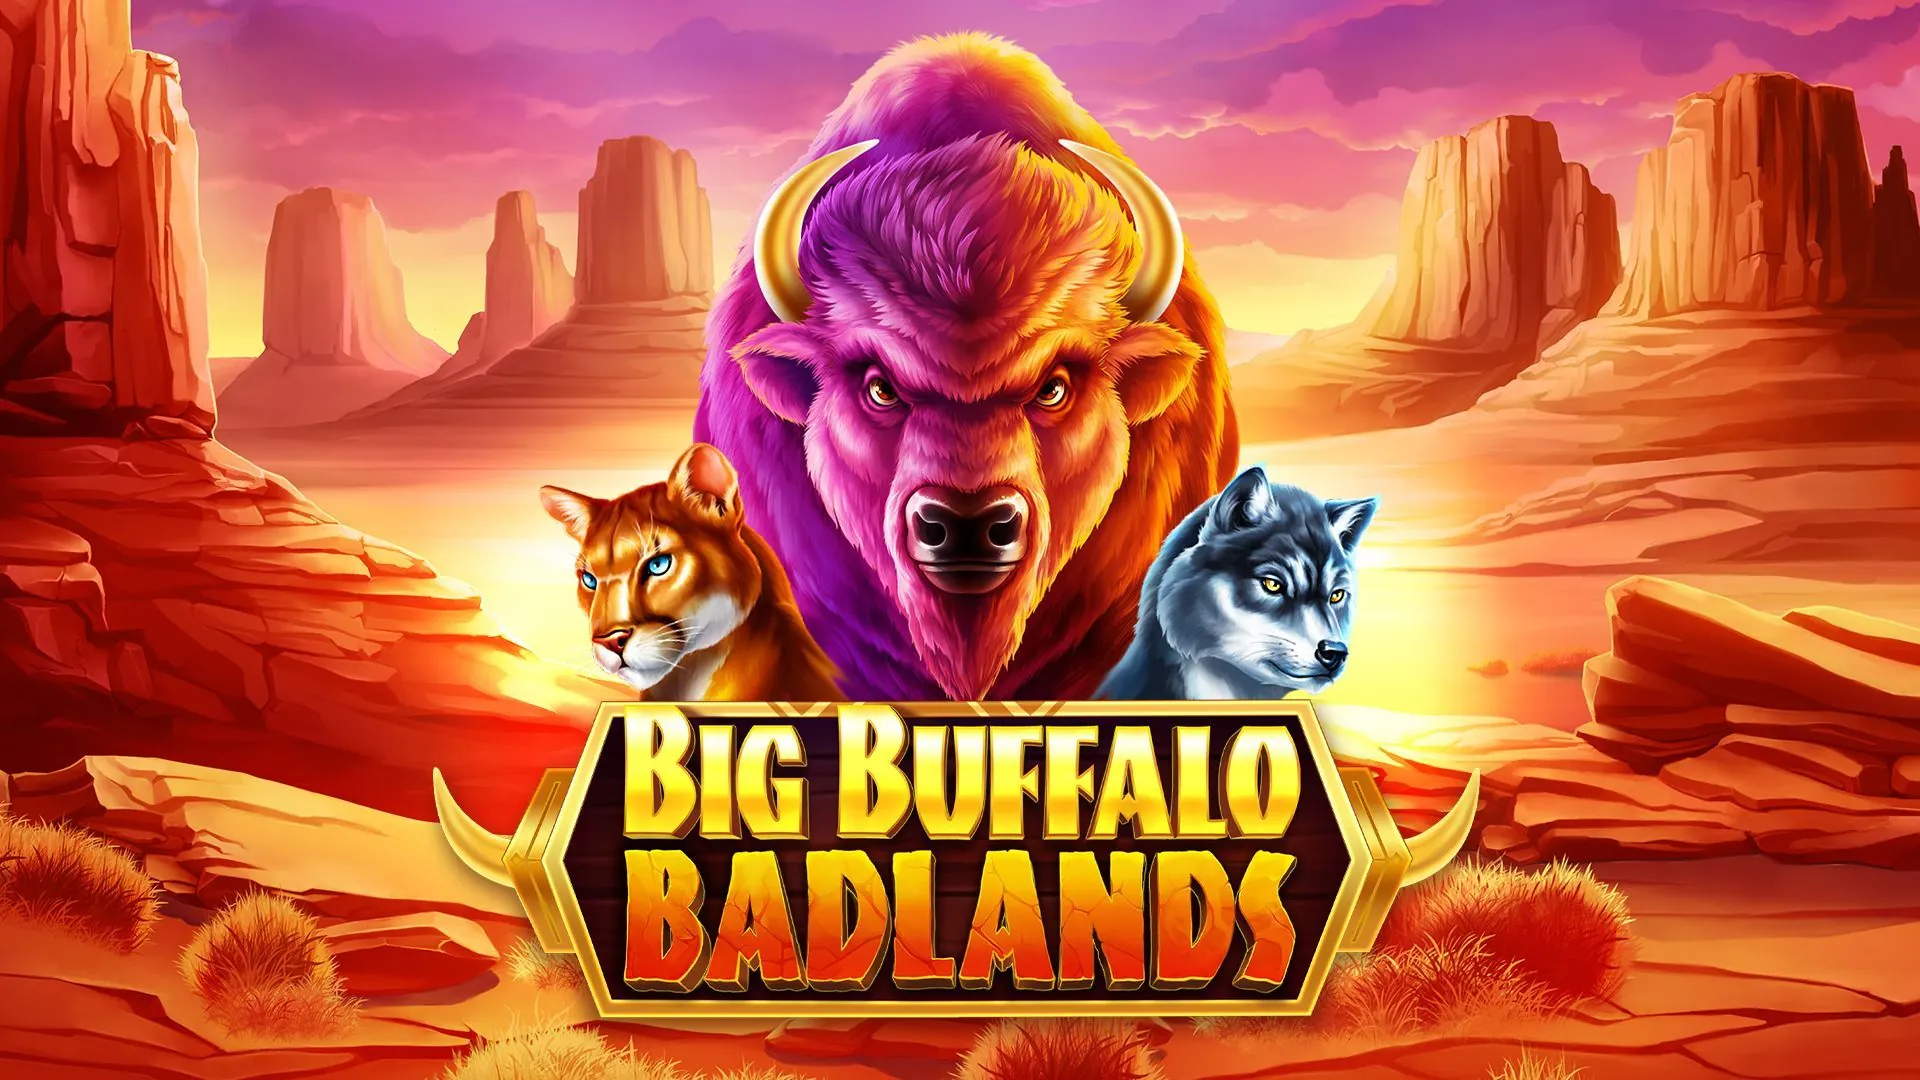 The latest game in our successful Big Buffalo games series is now Live - Big Buffalo Badlands